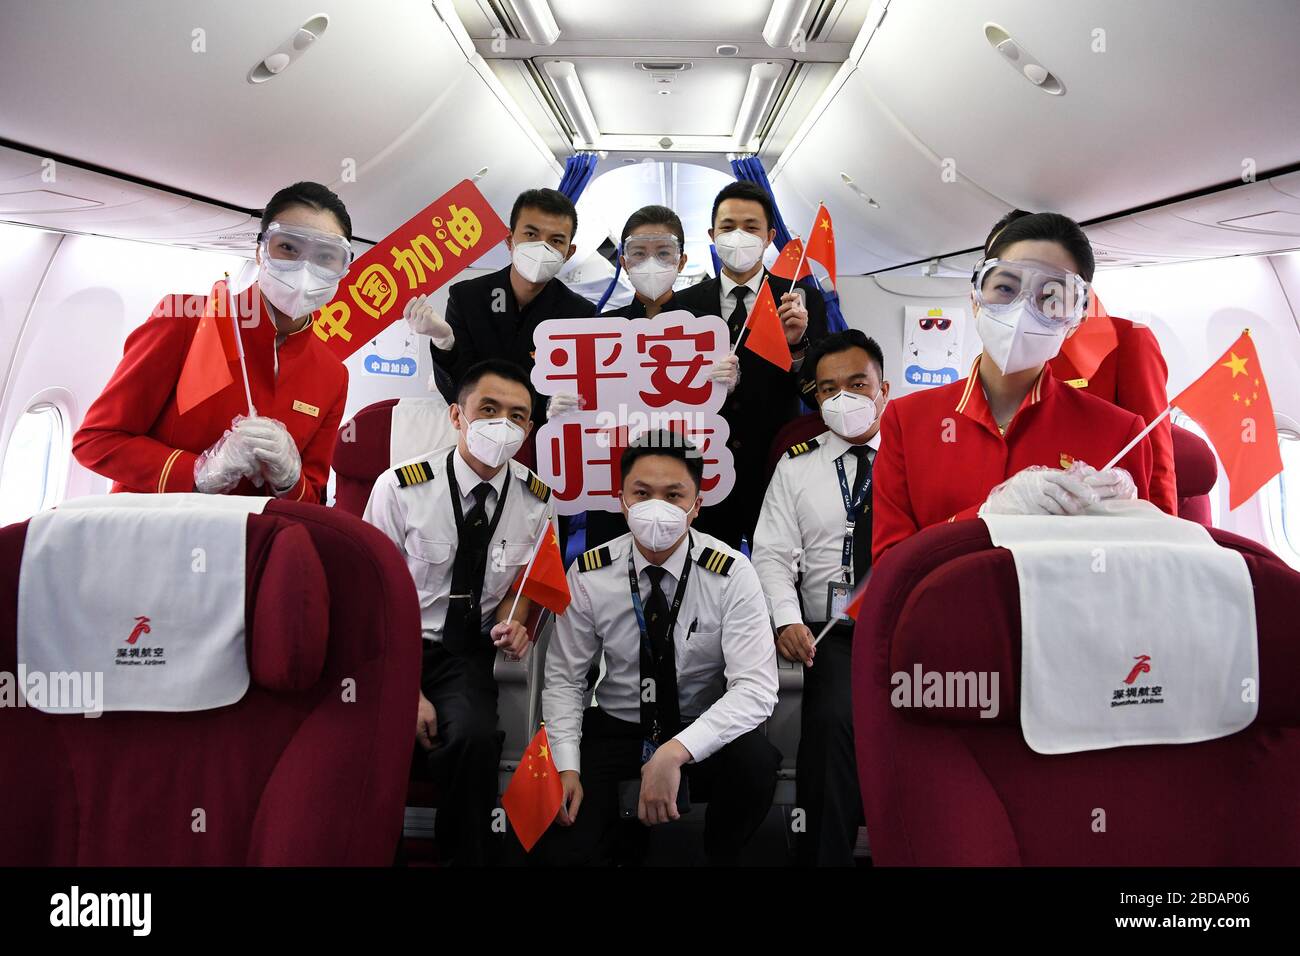 Shenzhen, China's Guangdong Province. 8th Apr, 2020. Crew members pose for a photo on flight ZH9127 of Shenzhen Airlines at the Baoan International Airport in Shenzhen, south China's Guangdong Province, April 8, 2020. Flight ZH9127 was the first flying from Shenzhen to Wuhan, after Wuhan, capital of central China's Hubei Province, lifted outbound travel restrictions from Wednesday following almost 11 weeks of lockdown to stem the spread of COVID-19. Credit: Liang Xu/Xinhua/Alamy Live News Stock Photo